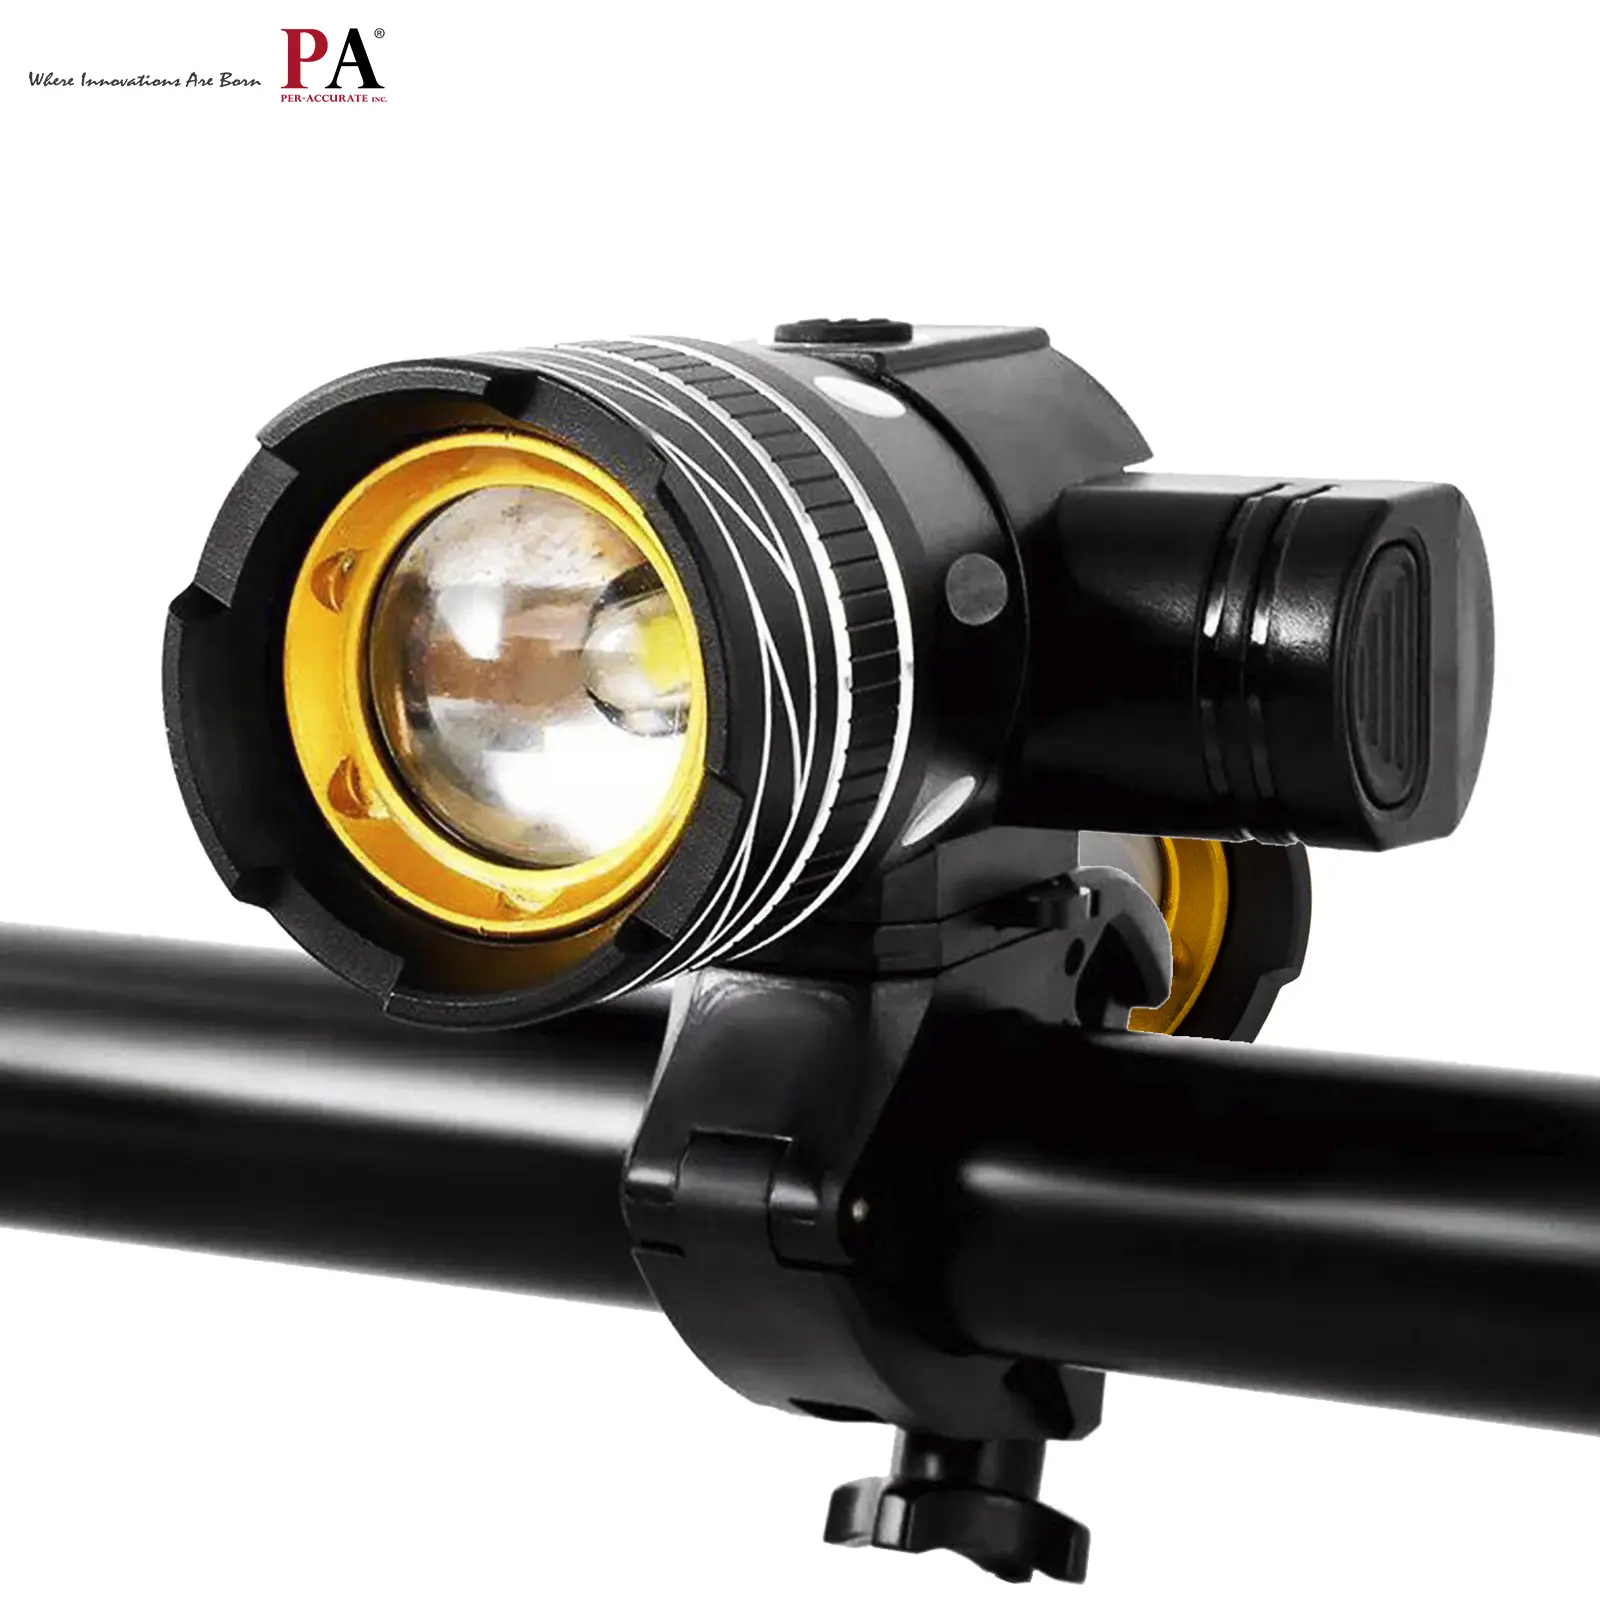 PN-1 LED Bicycle Light Rechargeable Super Bright IPX6 Portable Outdoor Water Resistant Torch Focus Adjustable PA